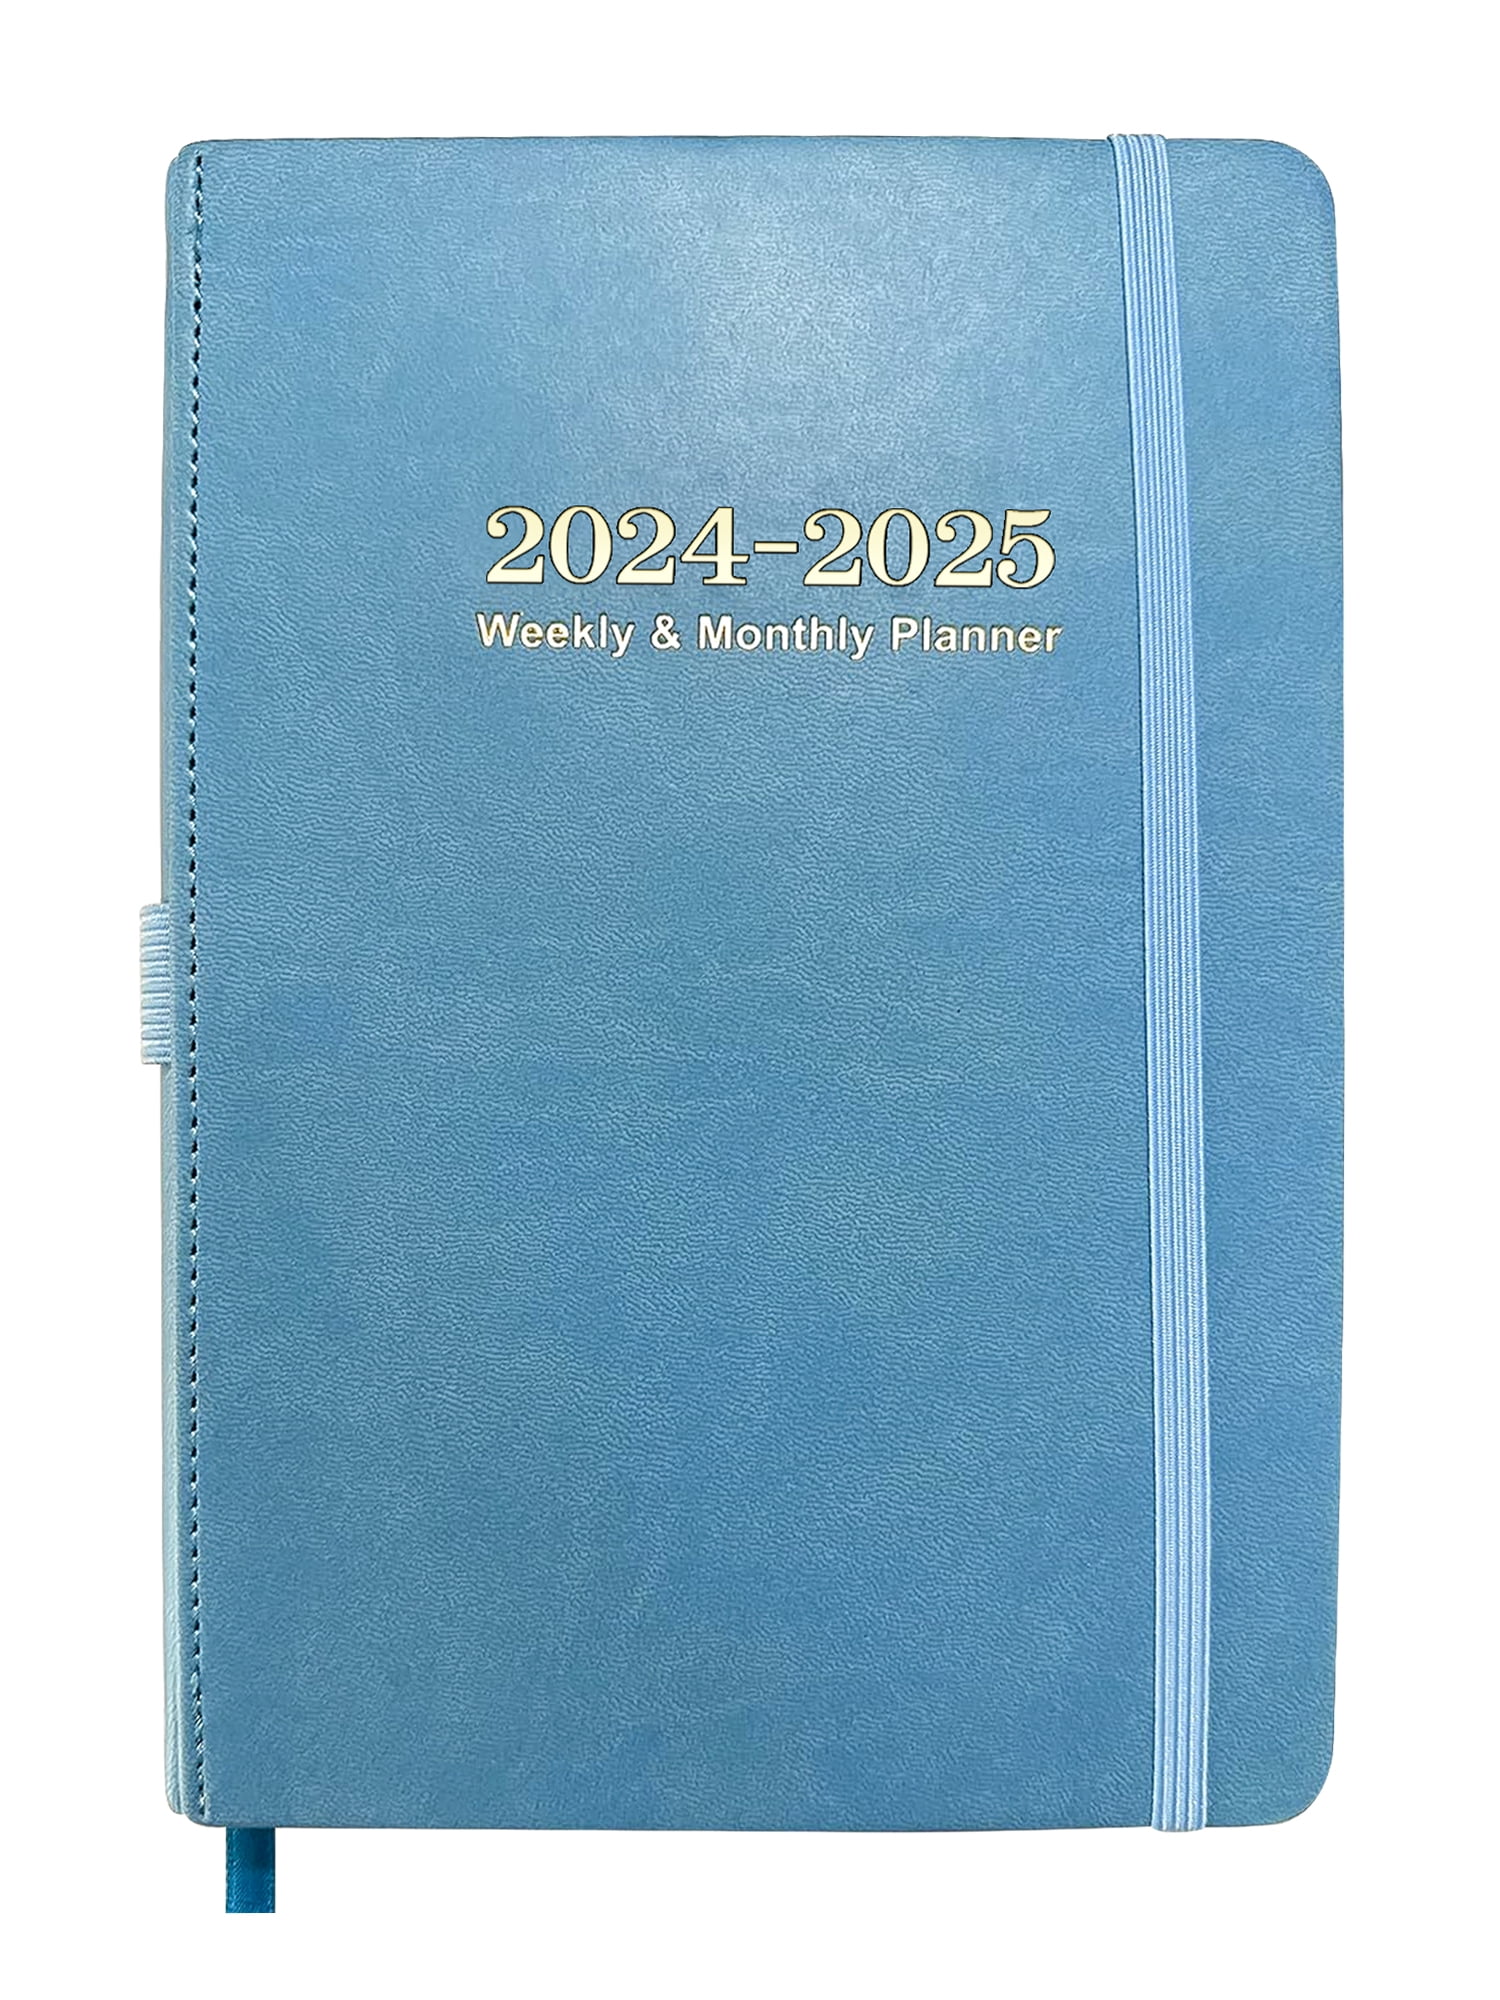 2023 Weekly & Monthly Planner, 5x8, Day Designer for Blue Sky, Meadow Blue  